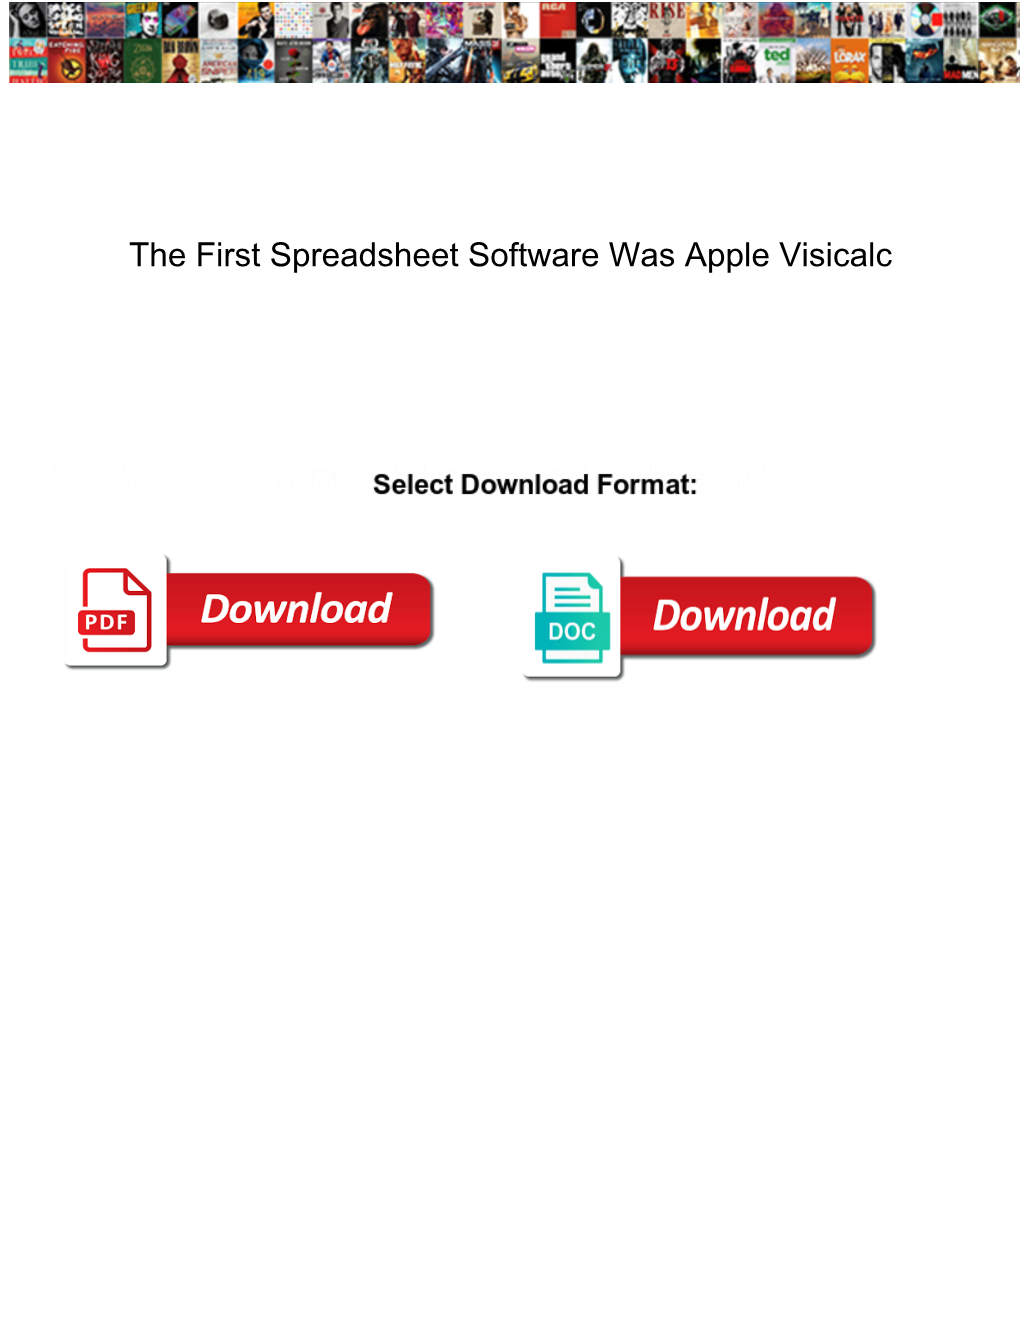 The First Spreadsheet Software Was Apple Visicalc